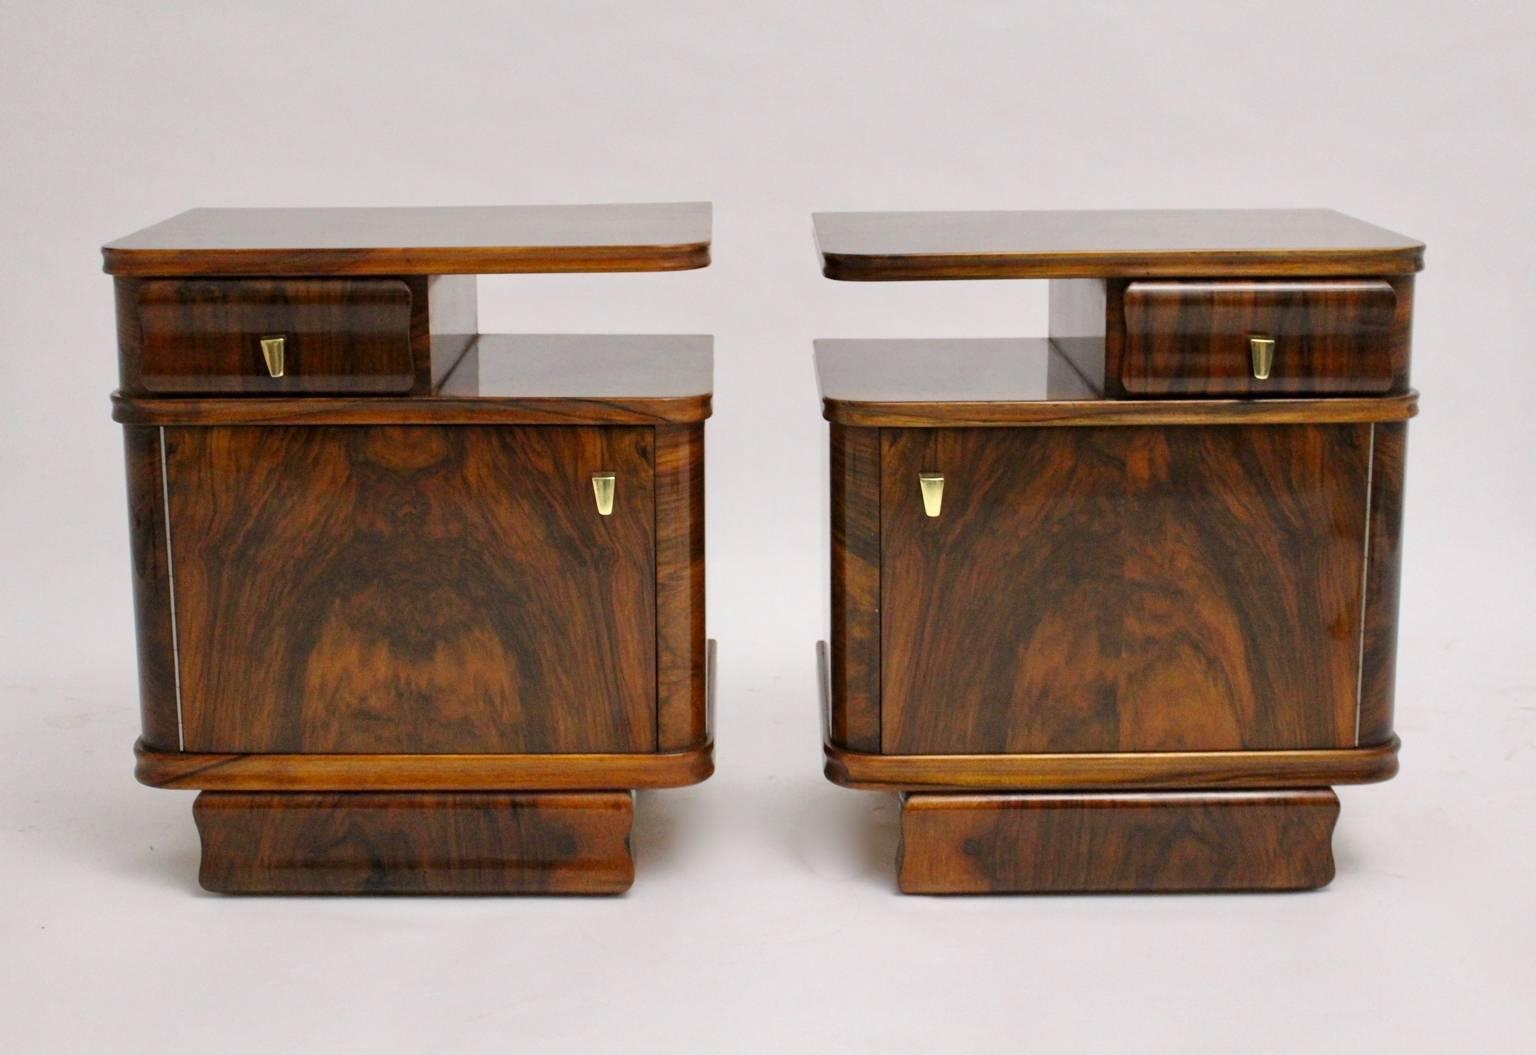 A beautiful pair of Art Deco brown walnut nightstands, which were designed and executed in Austria, 1930s.
The drawer and the door are equipped with original solid brass handles, while the surface of the chests has an impressive grain. The color is